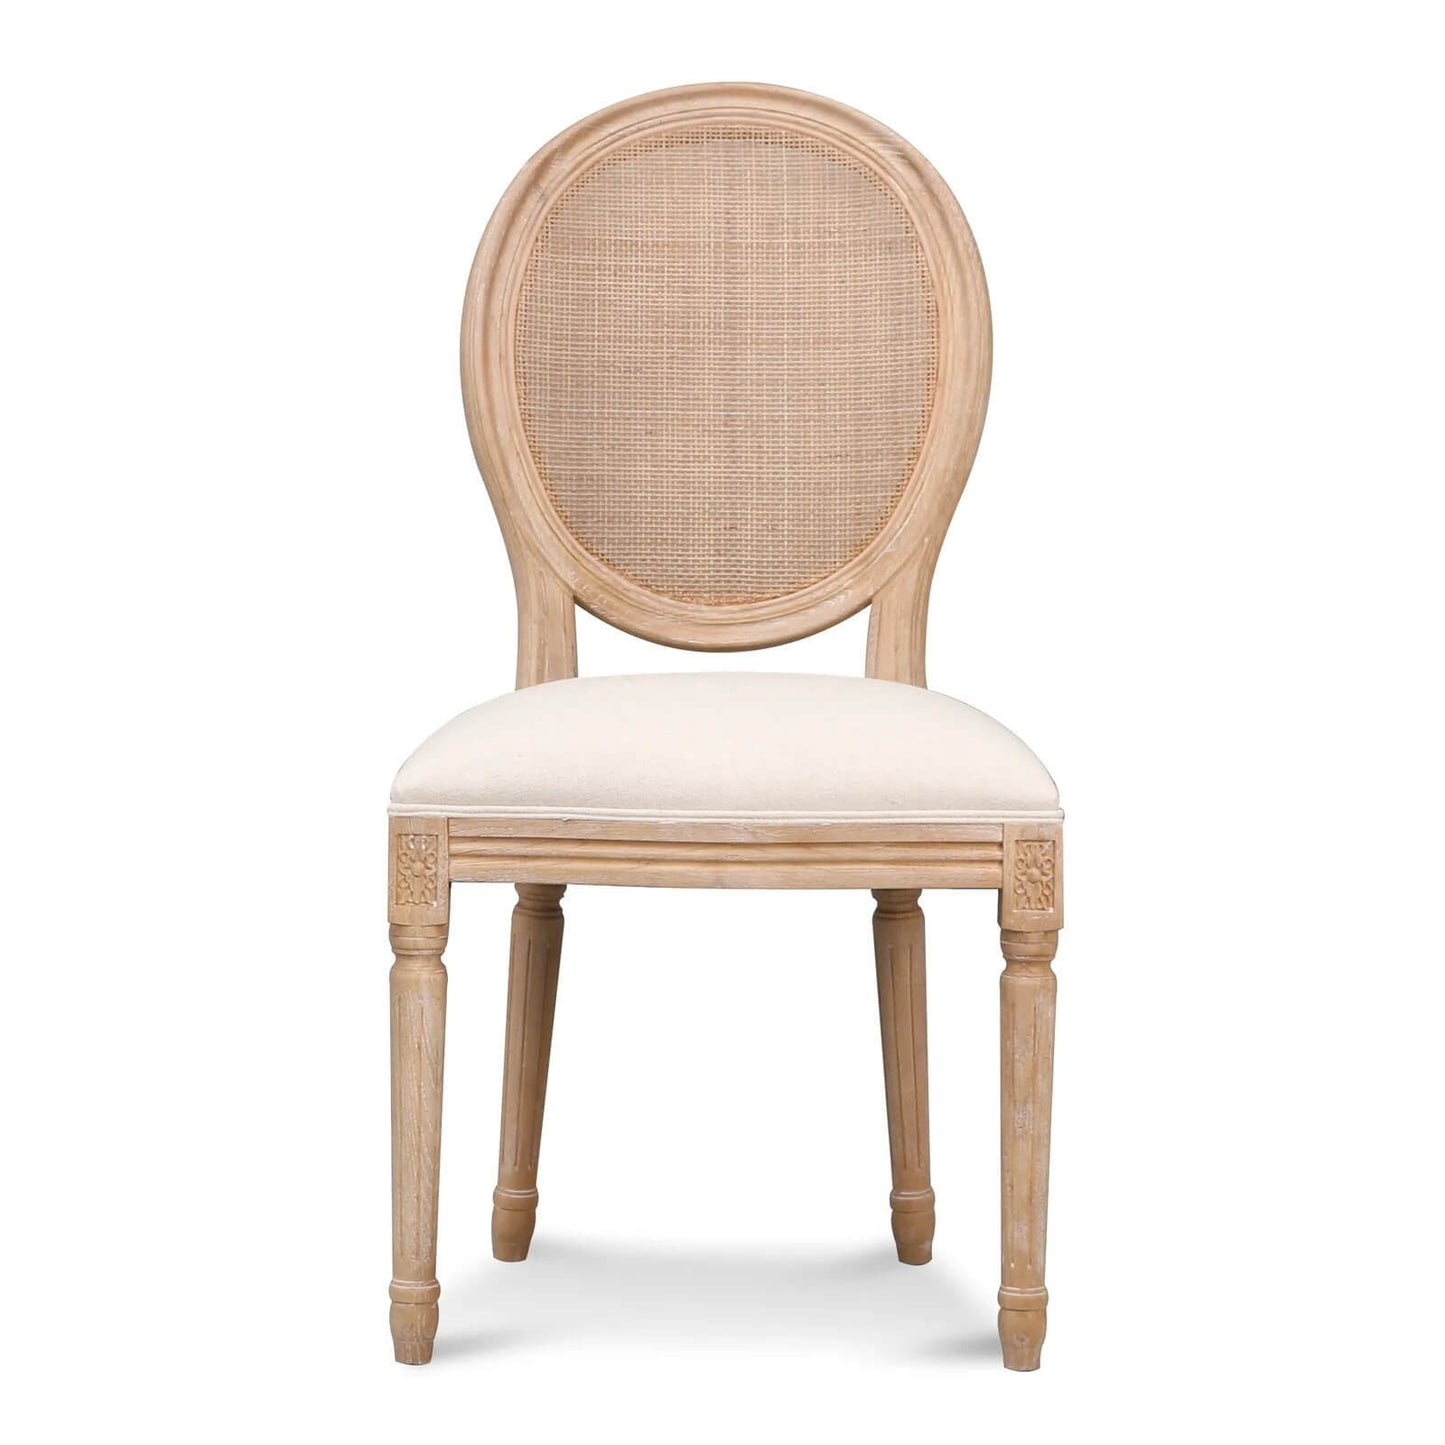 Gothenburg | French Provincial Wooden Rattan Dining Chairs | Set Of 2 | Beige